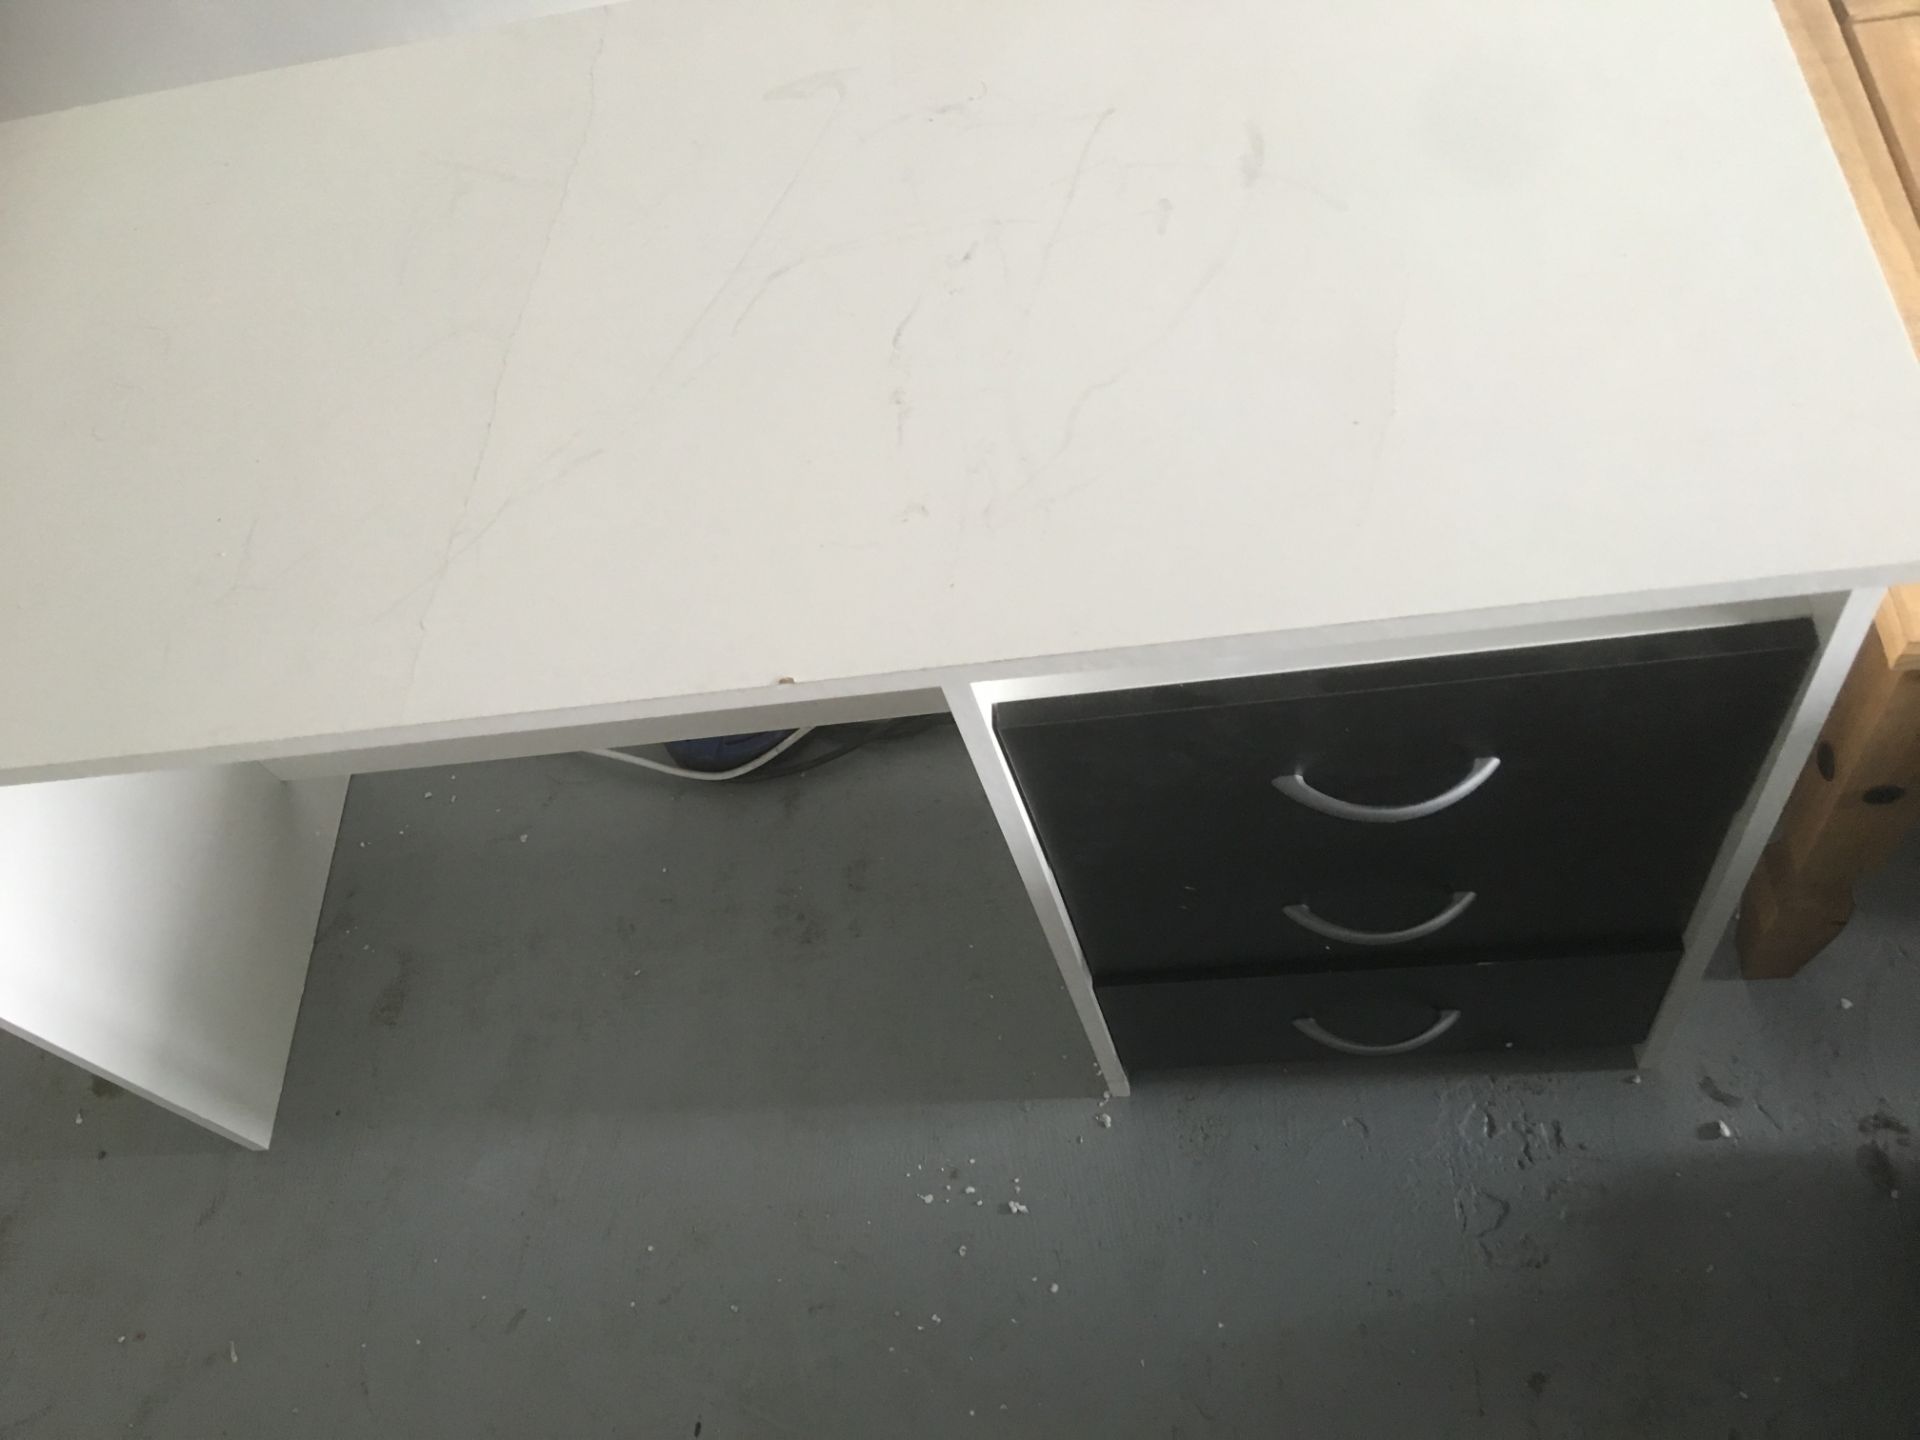 White Wooden Desk with 3 Black Draws - Image 2 of 2